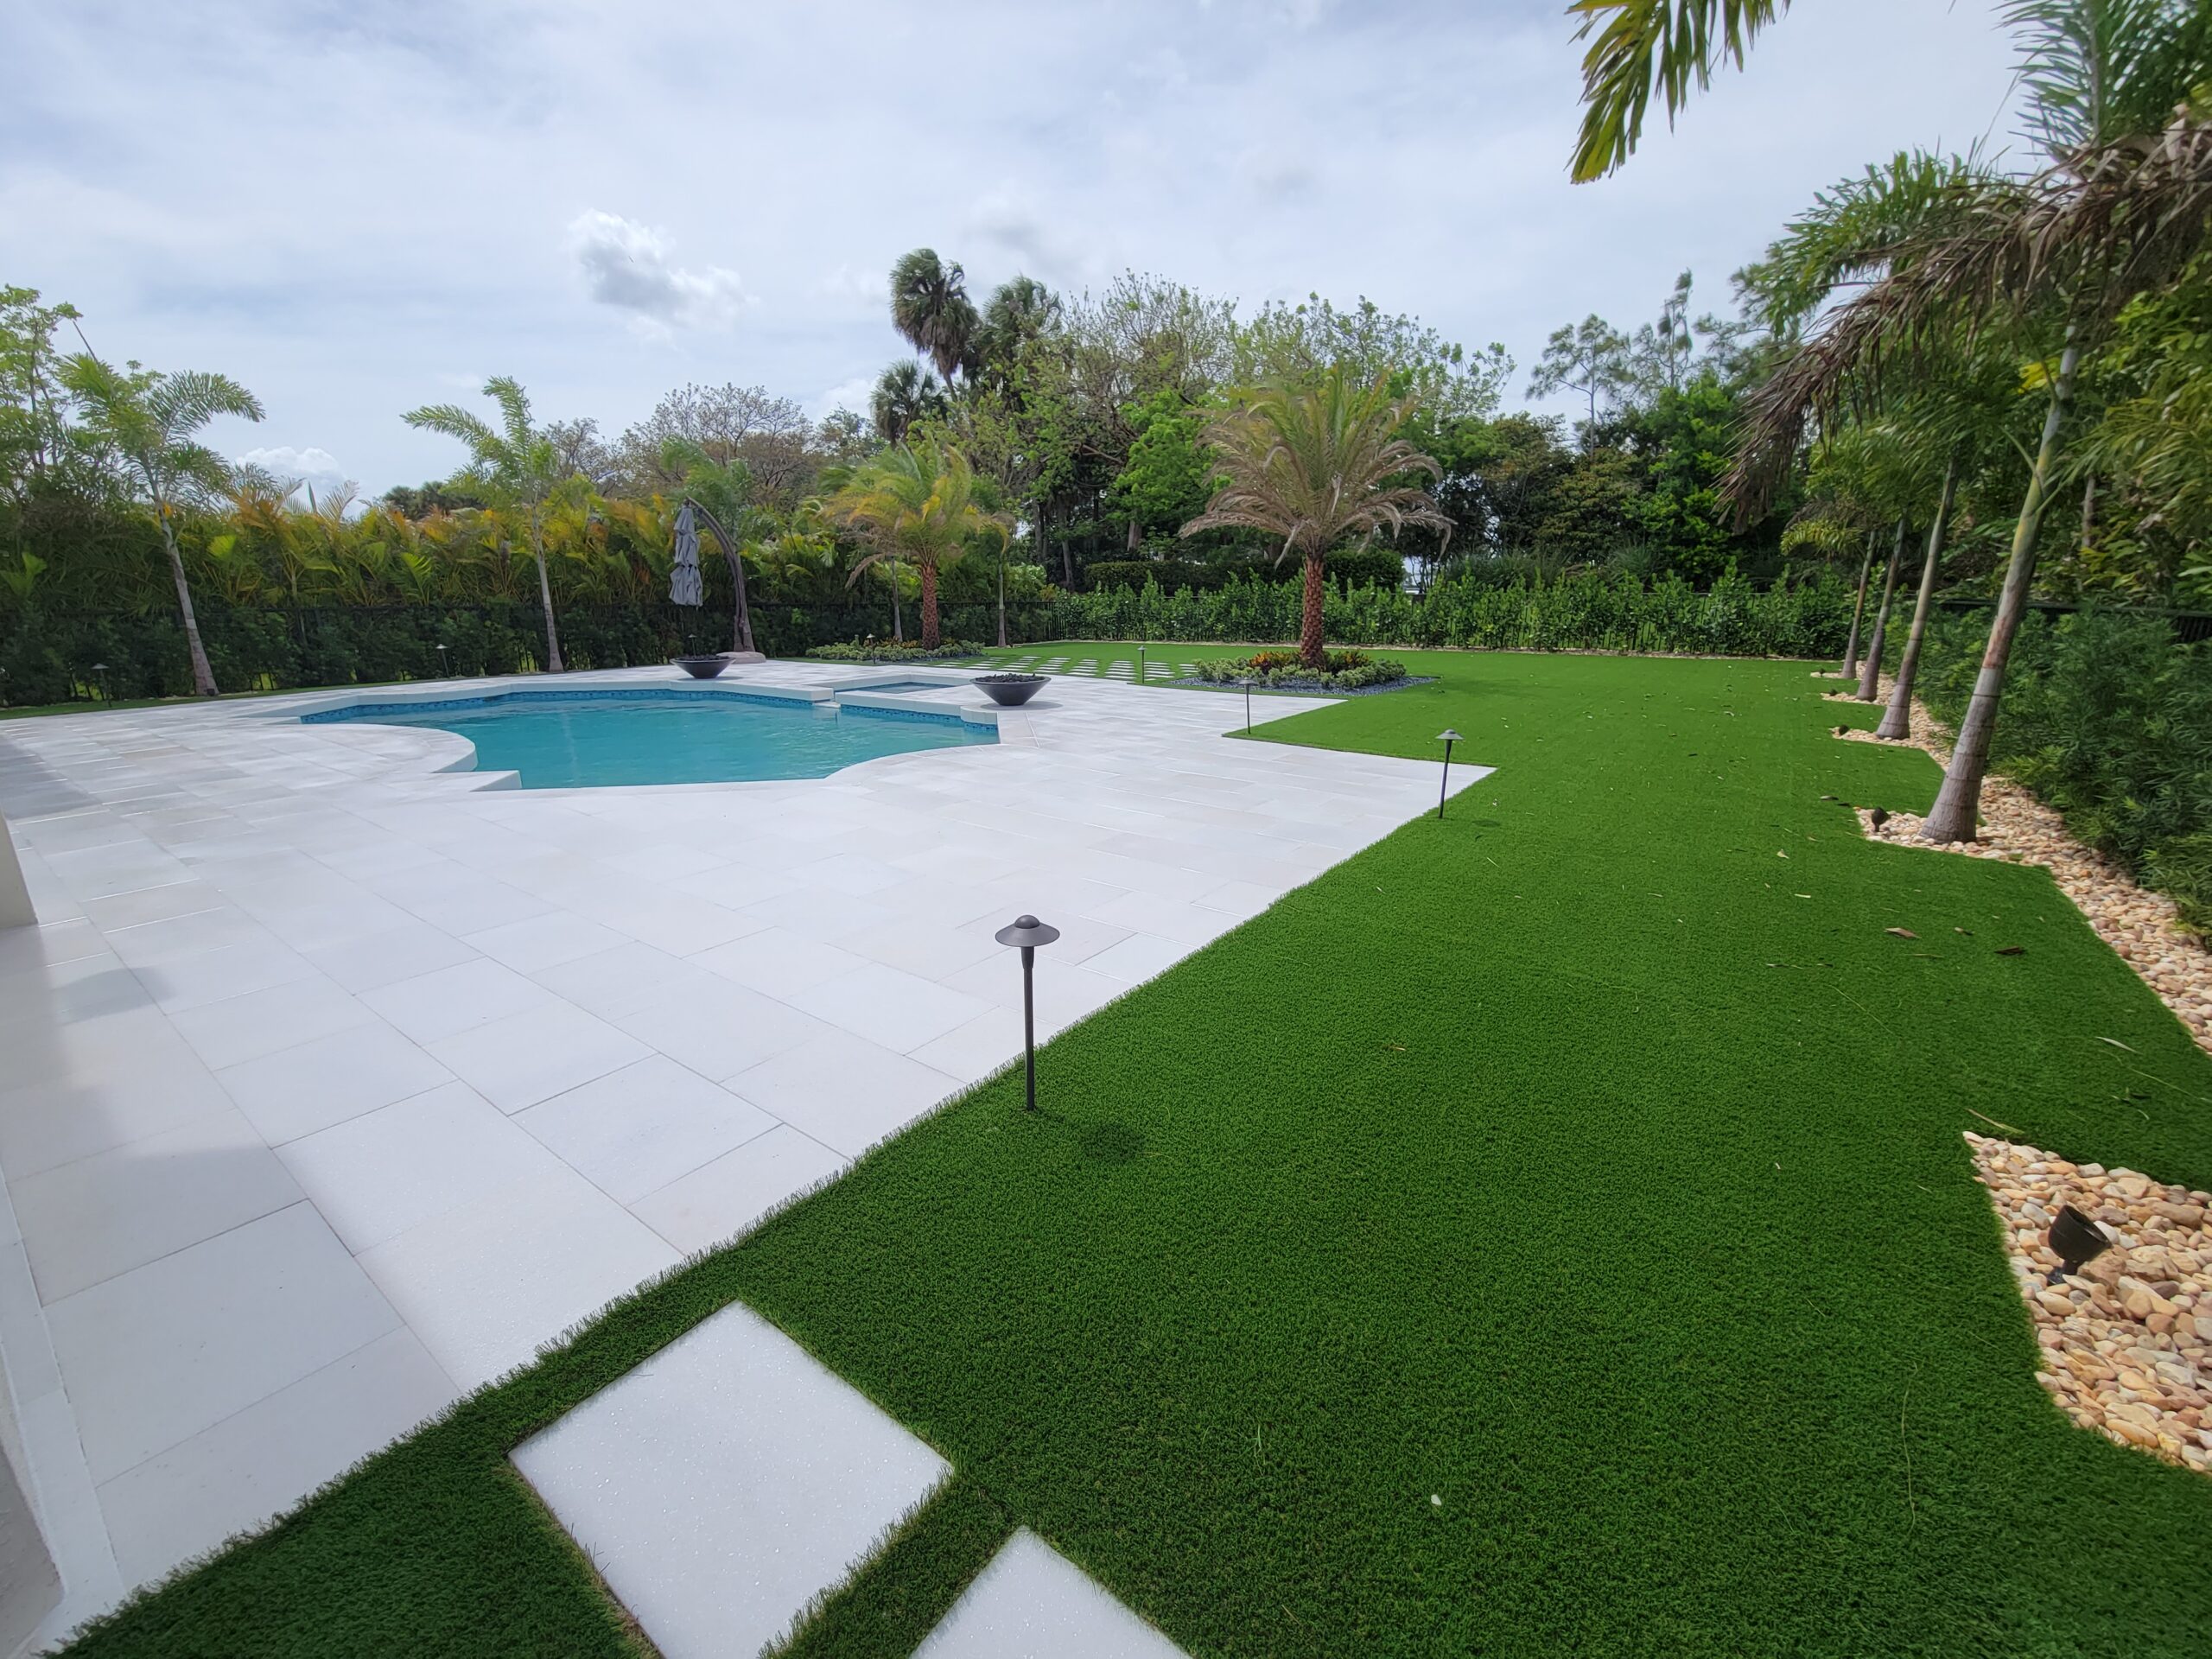 synthetic turf water features pool deck pavers walkways hardscaping landscape design